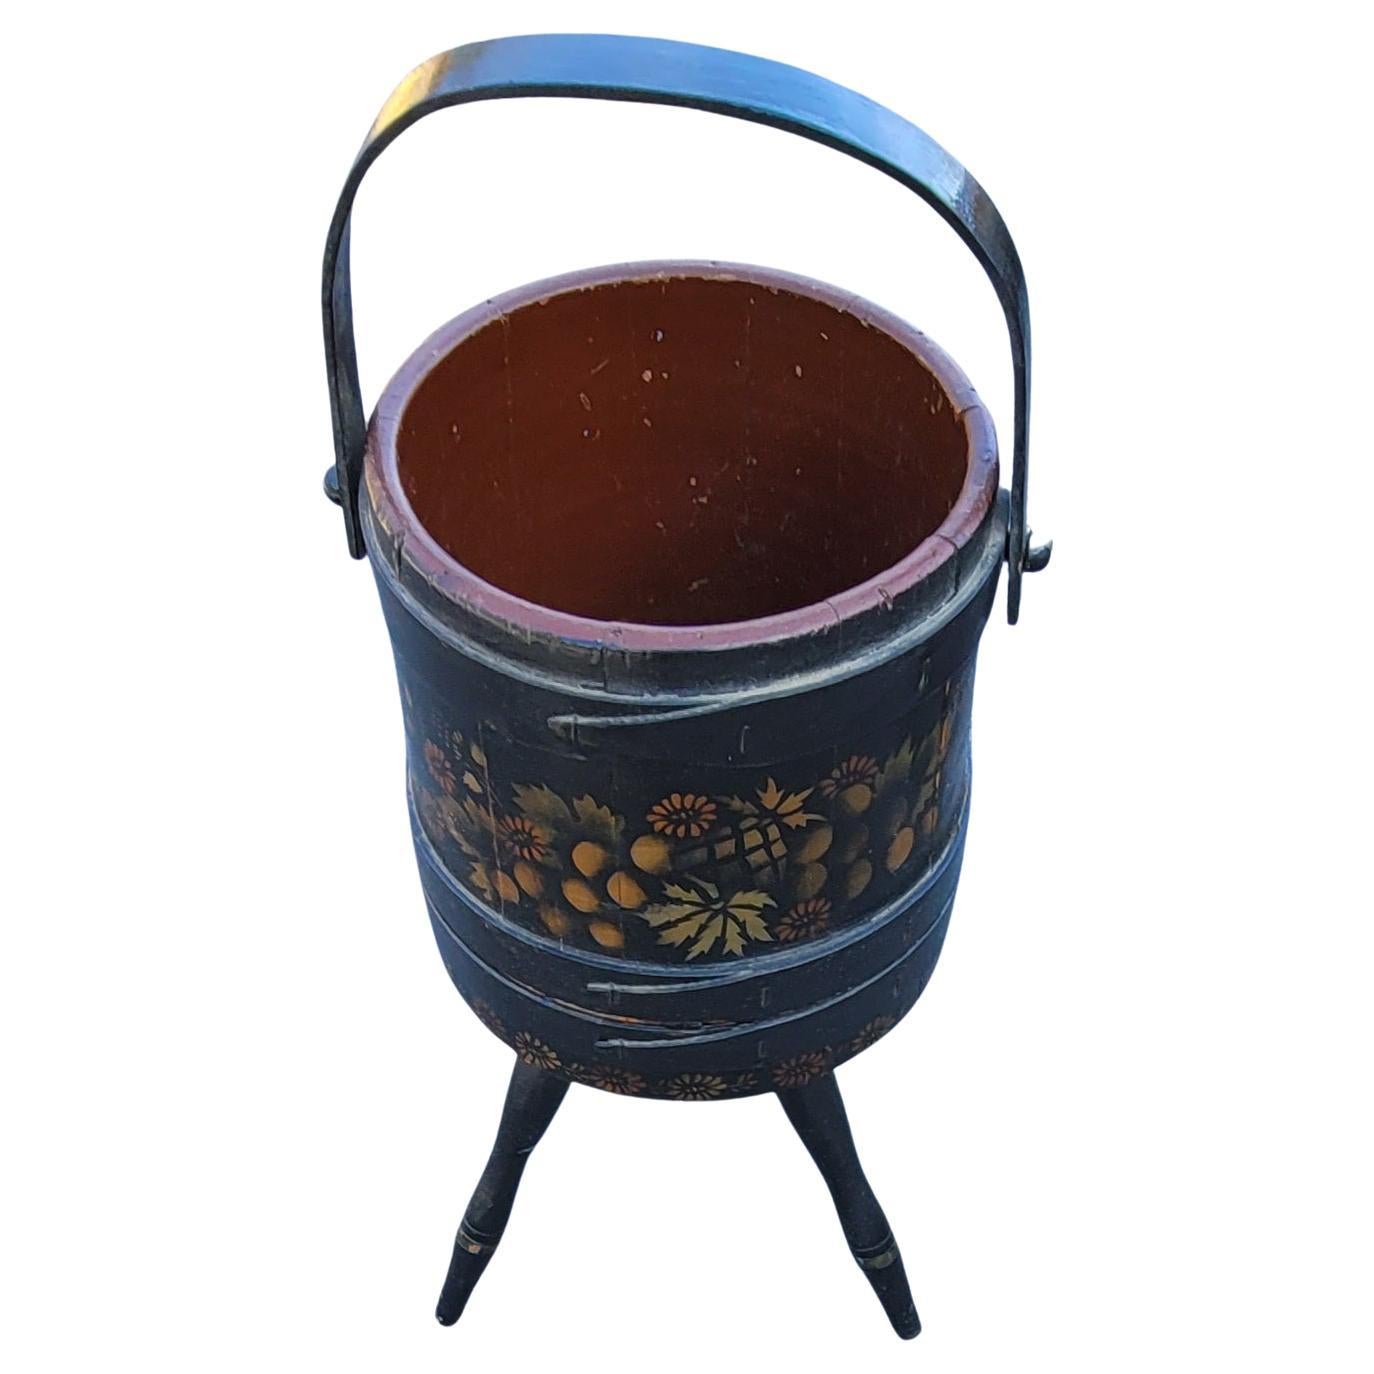 Edwardian 1920s Hand-Crafted, Painted and Decorated Tripod Firkin or Sewing Bucket For Sale